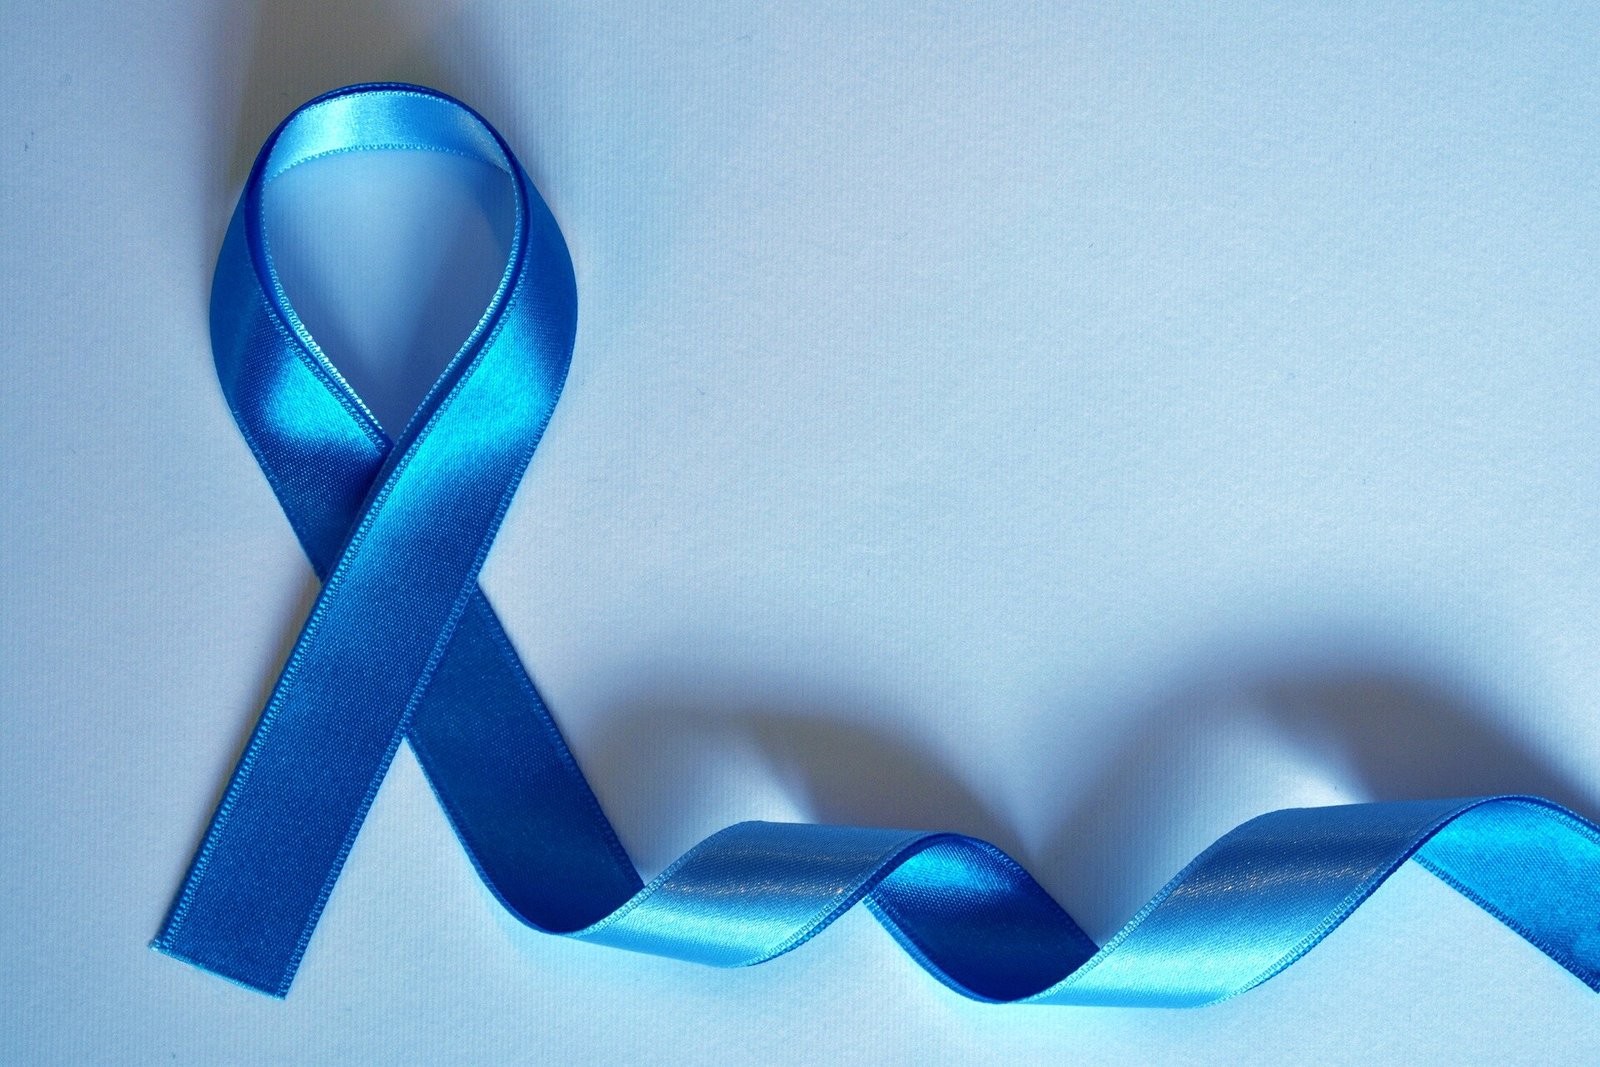 Five-year interval is safe for prostate cancer screening, research shows